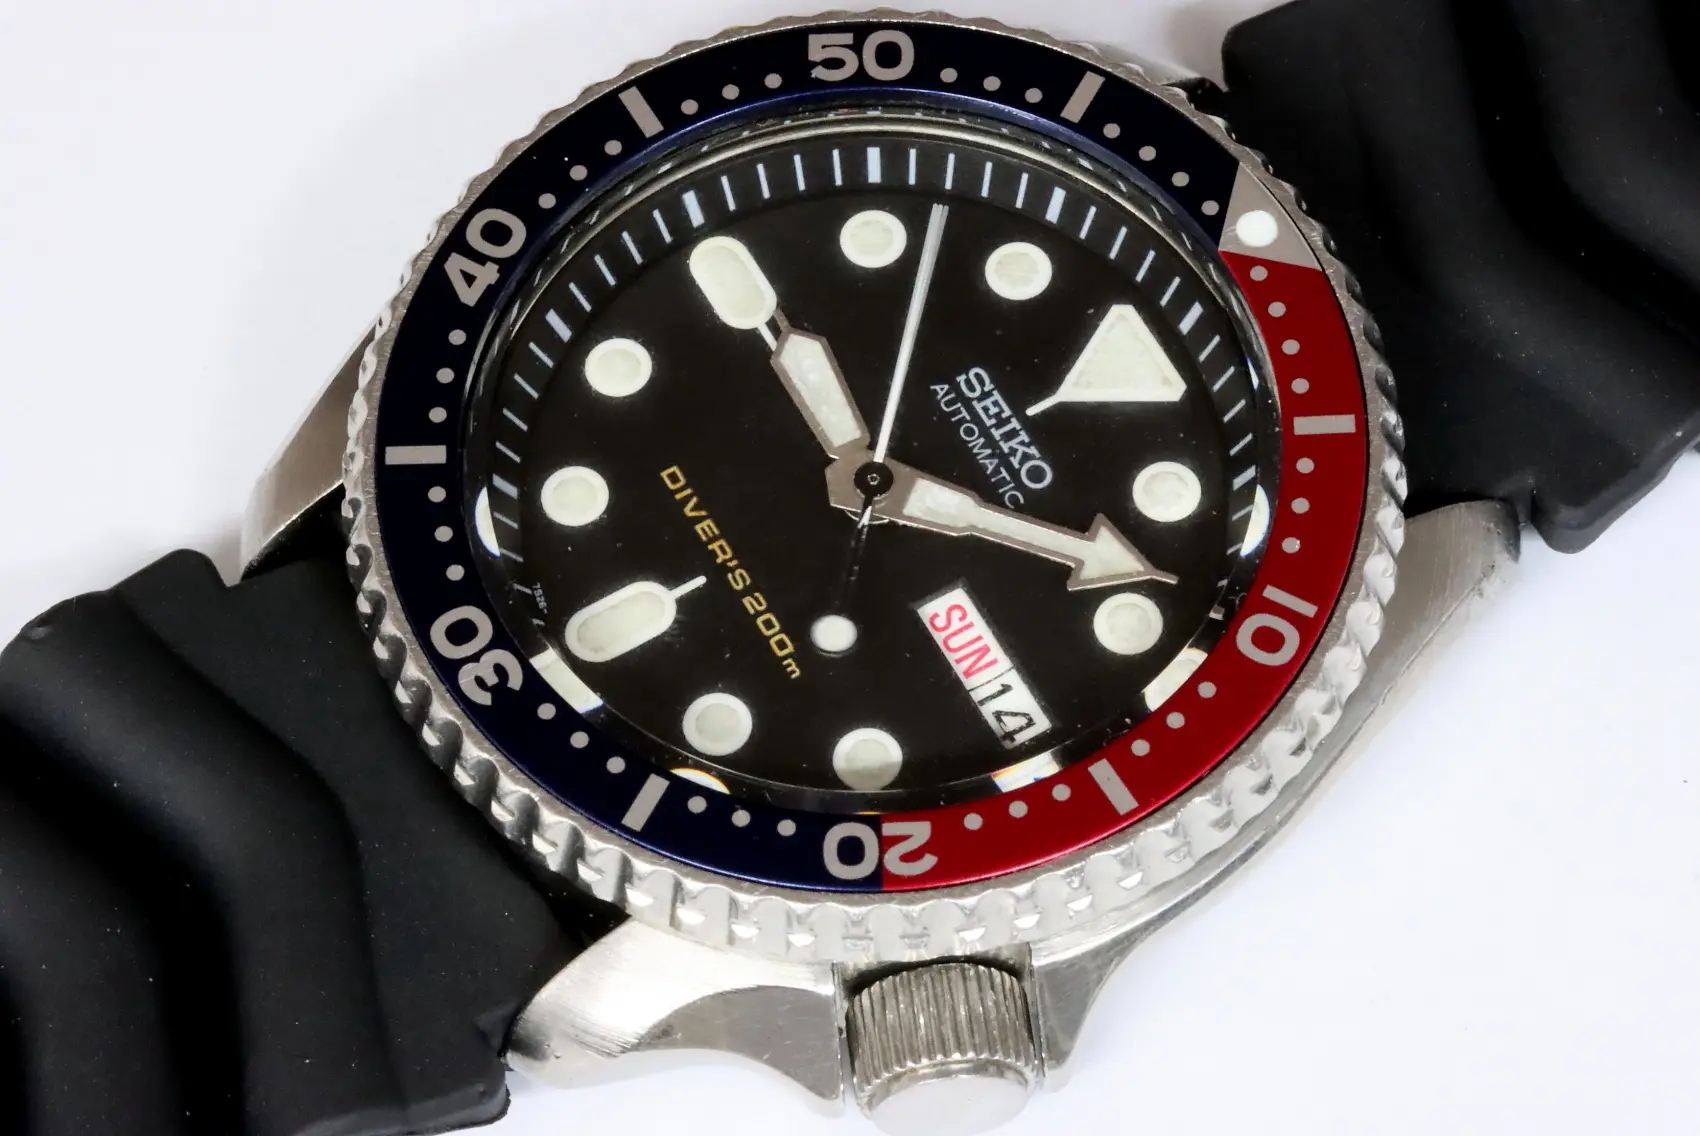 Seiko 7S26-0020 SKX007 diver's watch with luminous in poor condition